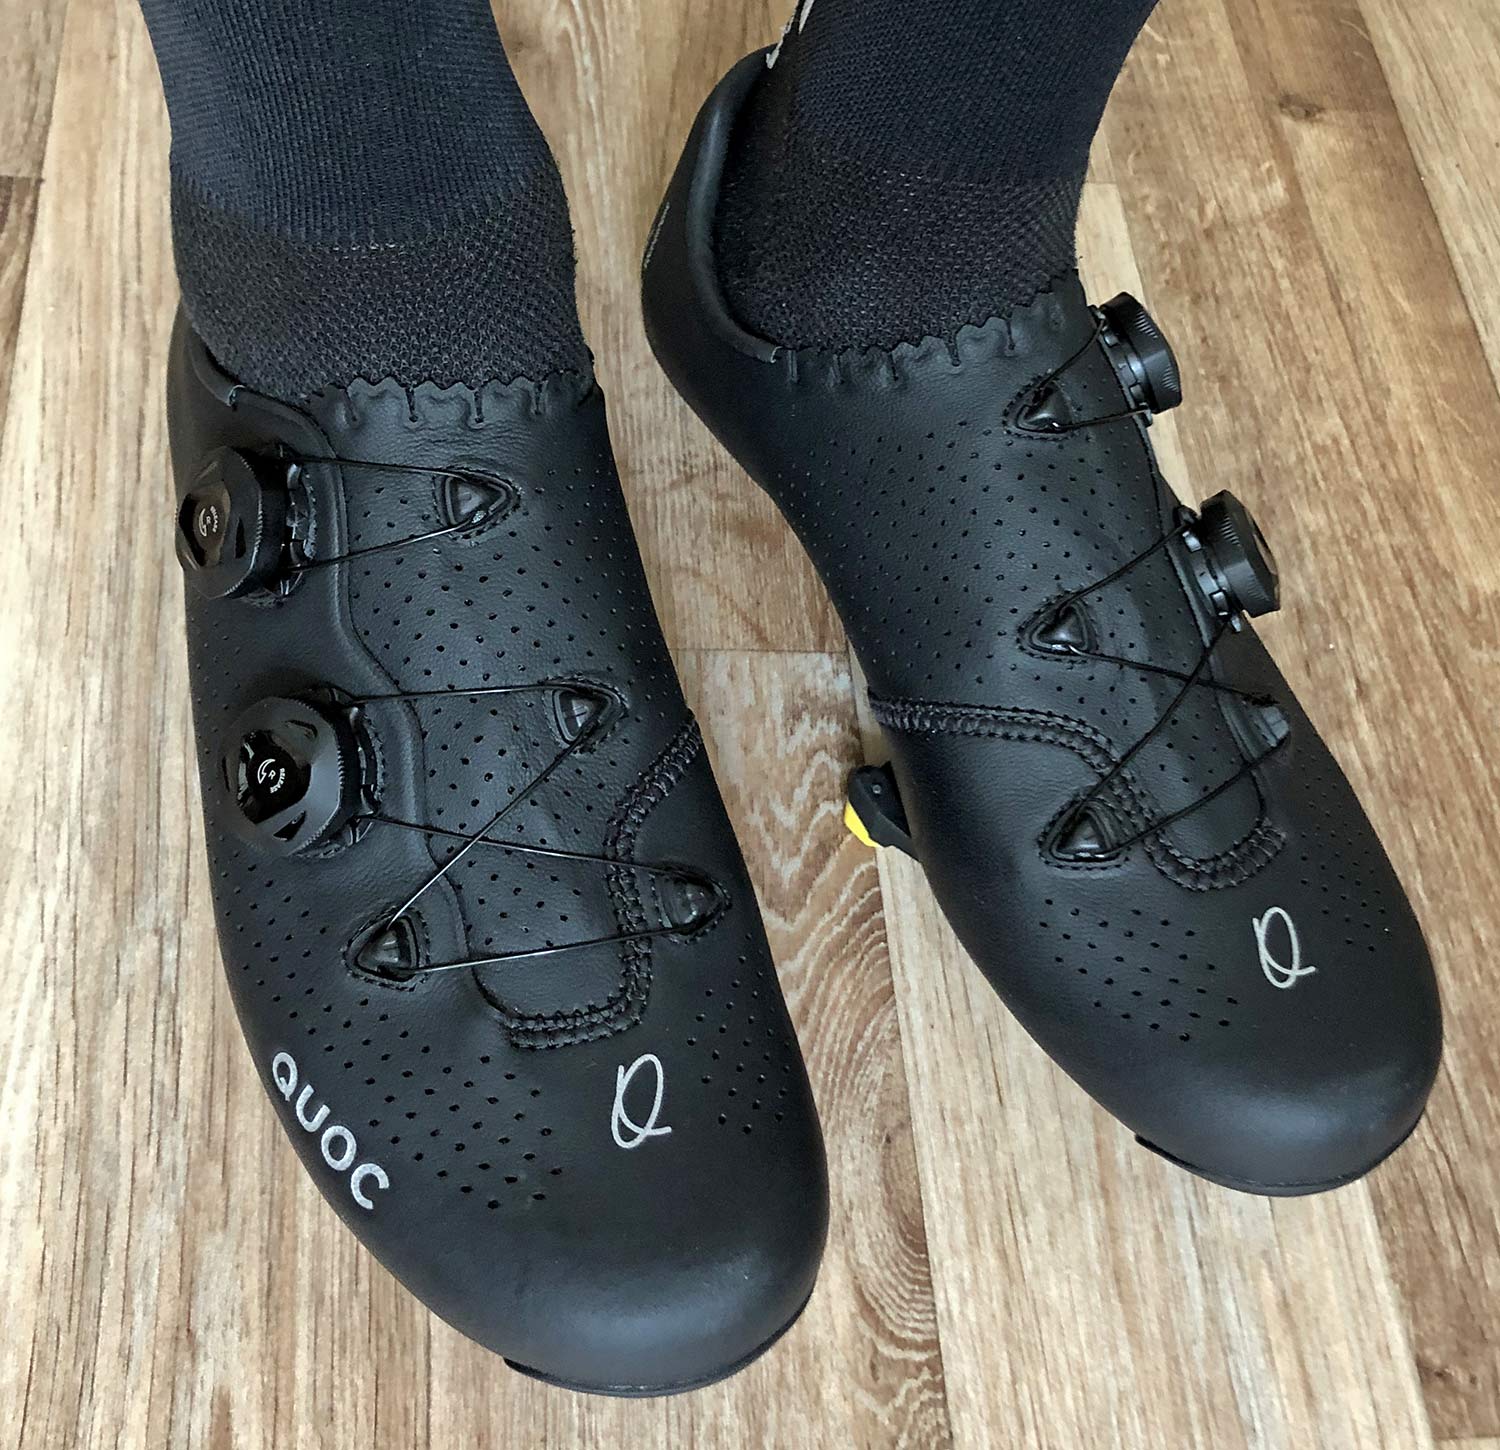 Quoc Mono II lightweight carbon-soled road cycling shoes Review, fit